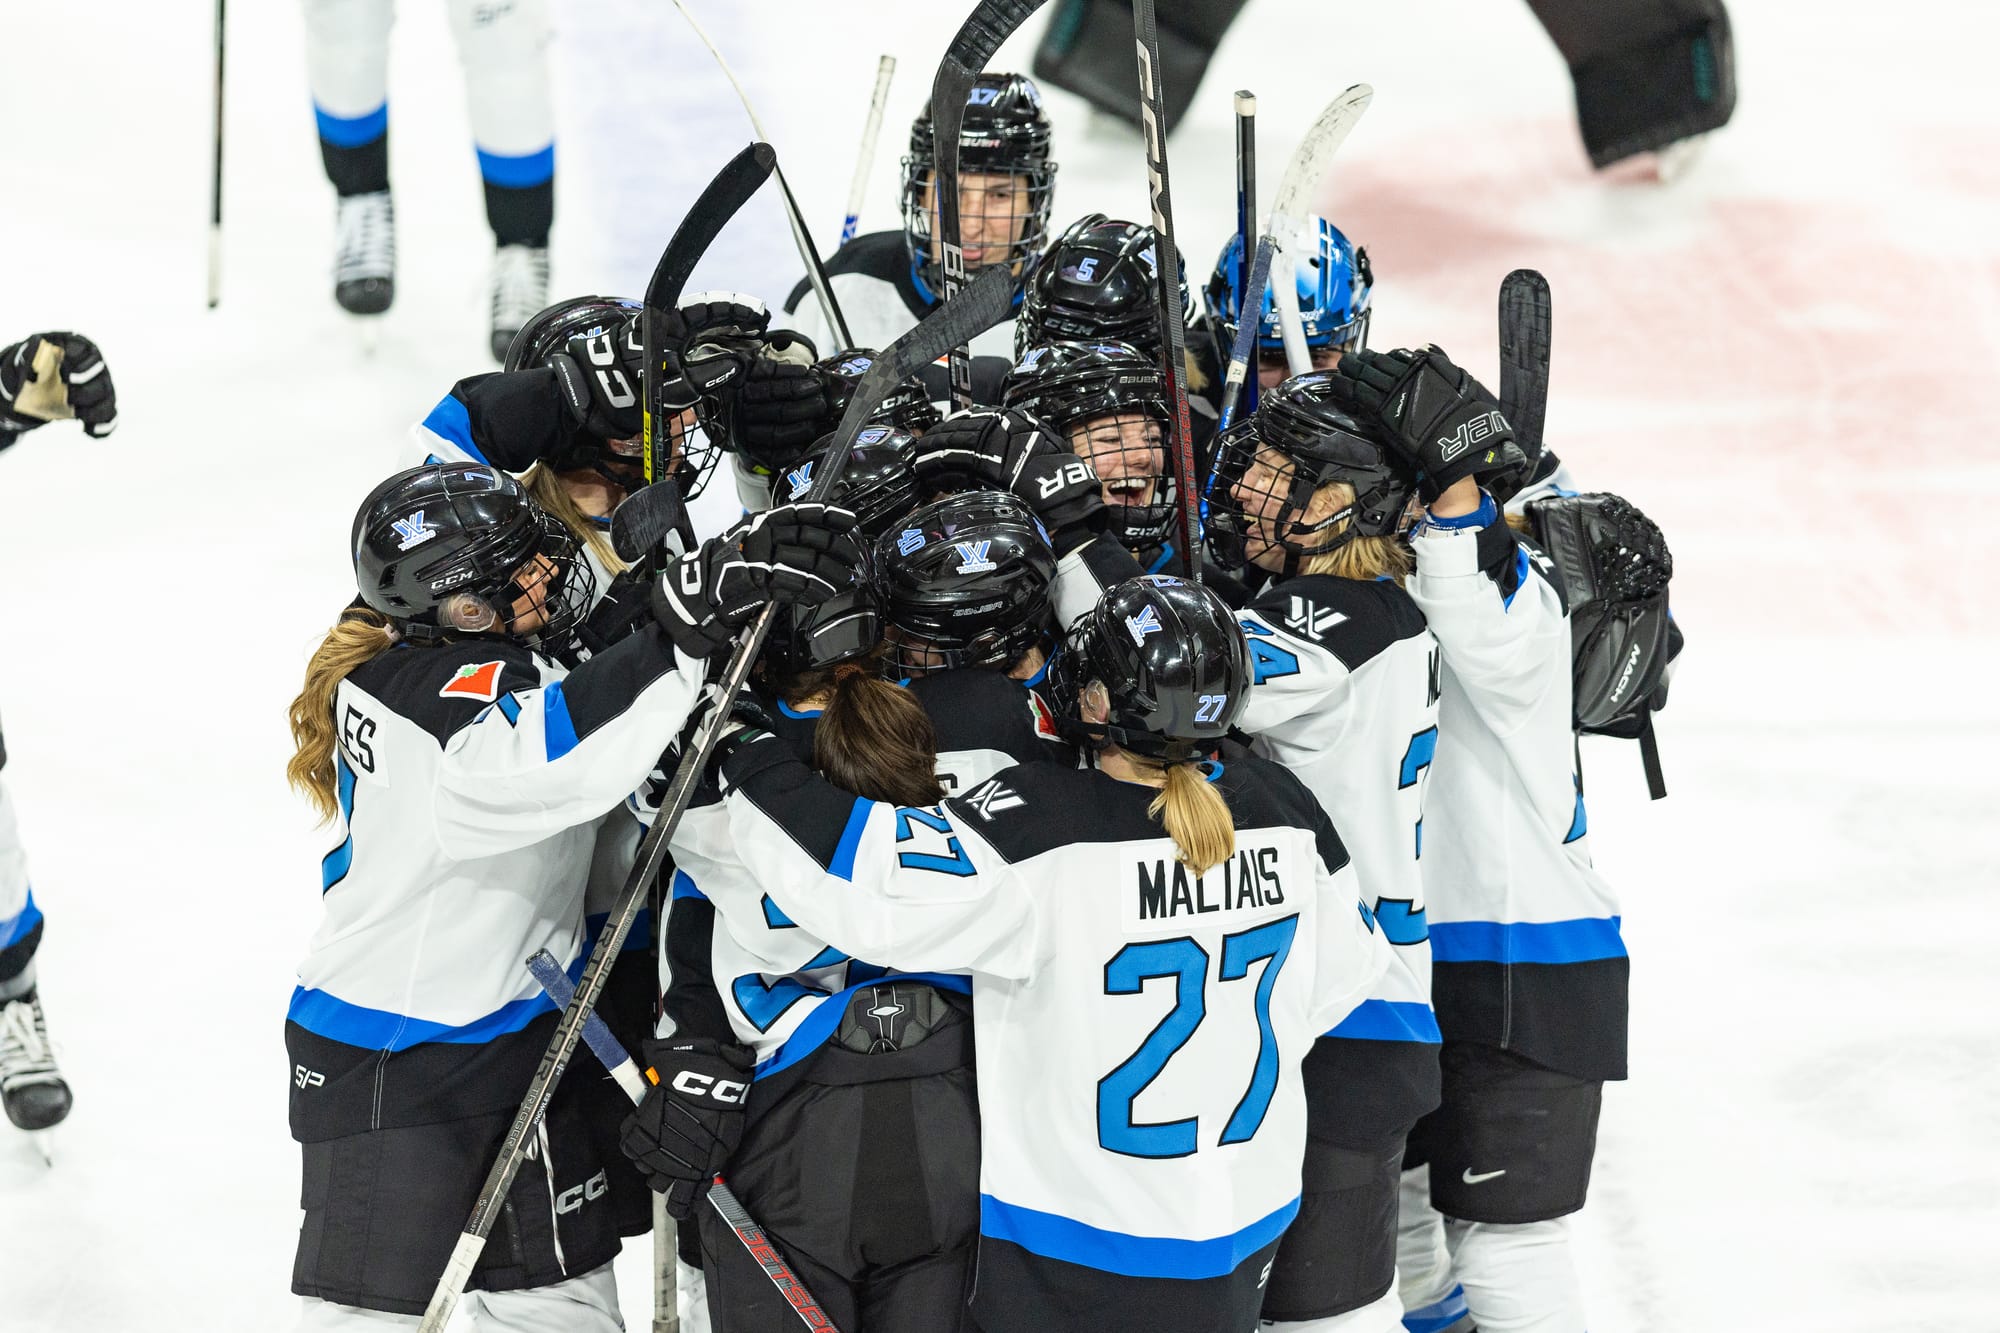 Toronto players celebrate their win against Minnesota. They are in a massive group hug, and wearing their white away uniforms.